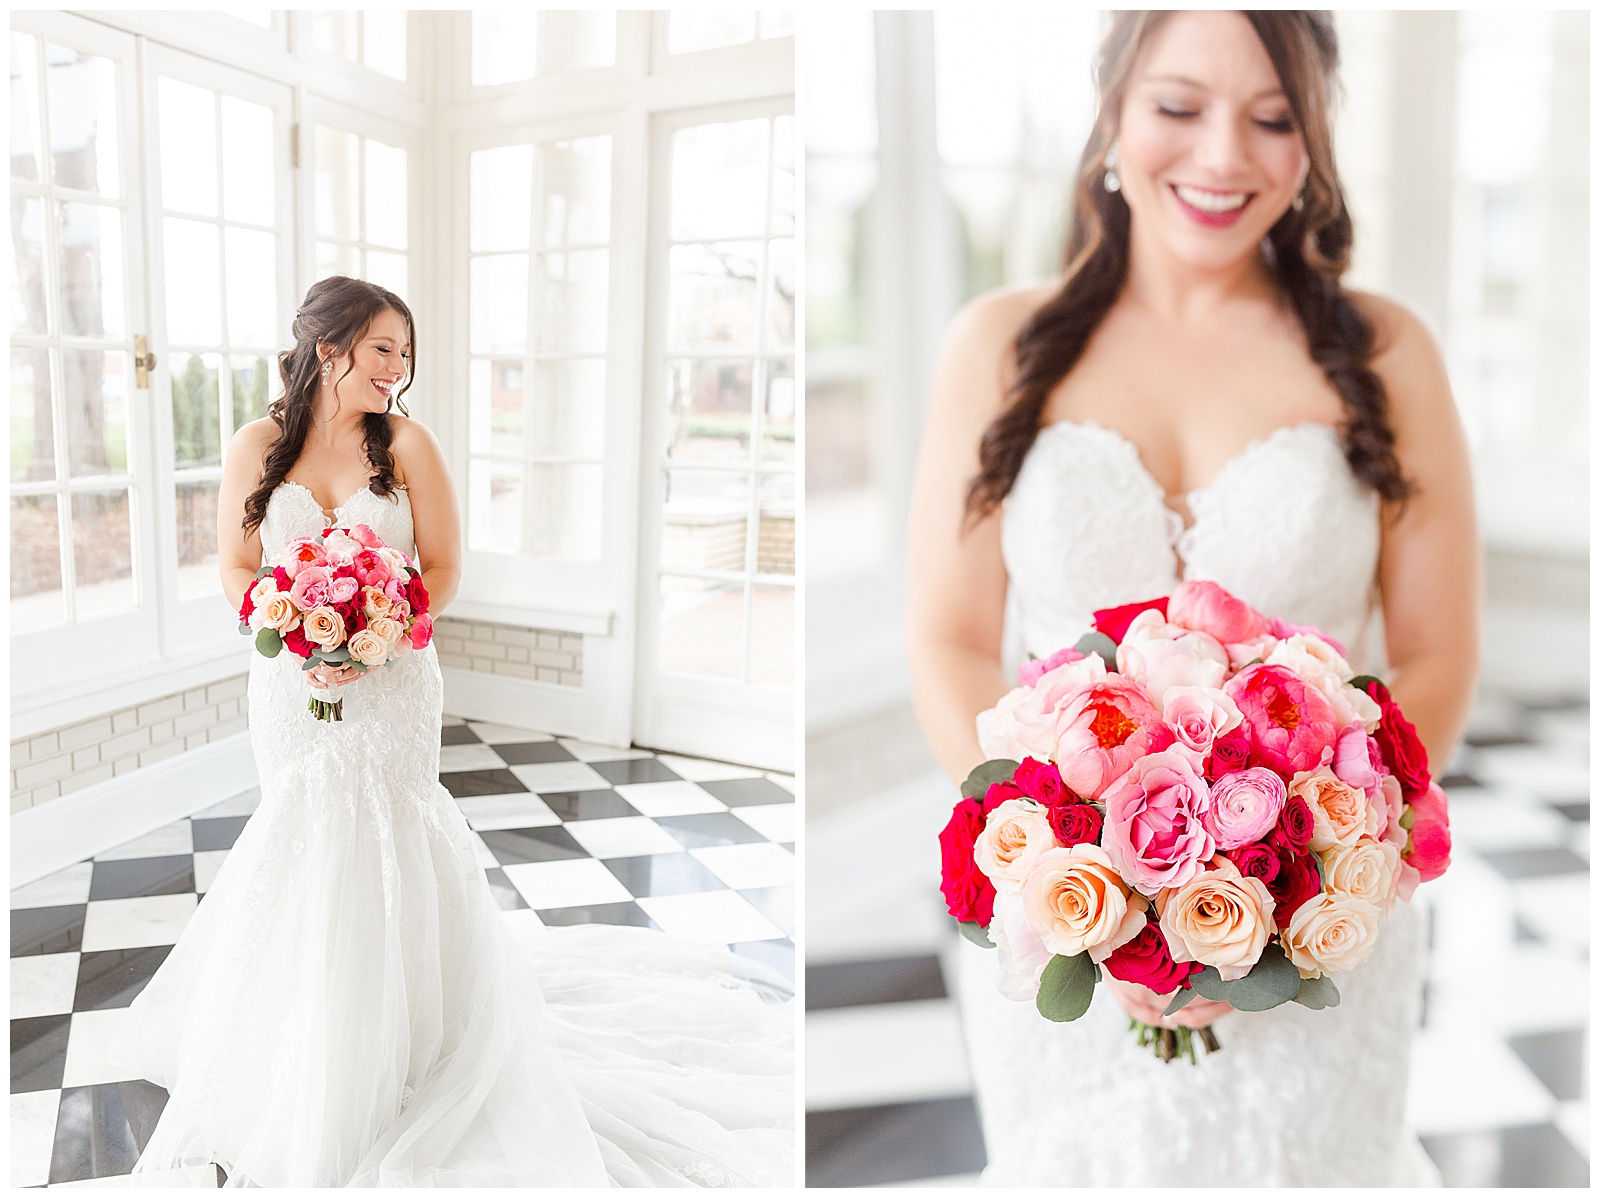 Pink Bride's Bouquet Detail Shots from Light and Airy Outdoor Wedding at Separk Mansion in Gastonia, NC | Kevyn Dixon Photography